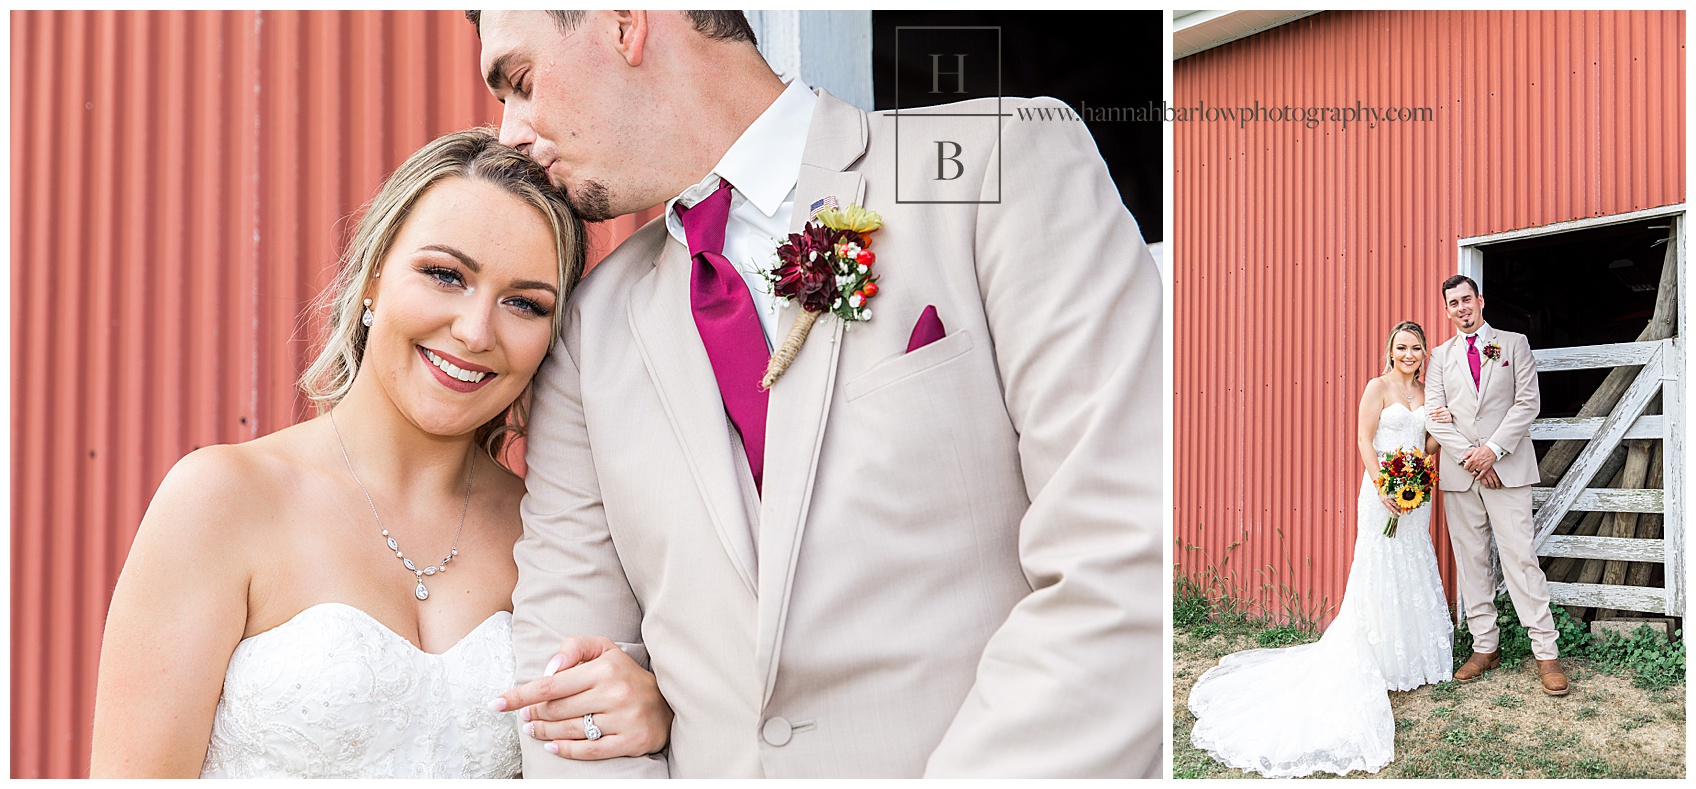 Wedding Photos in front of Barn at Heaven Sent Farms